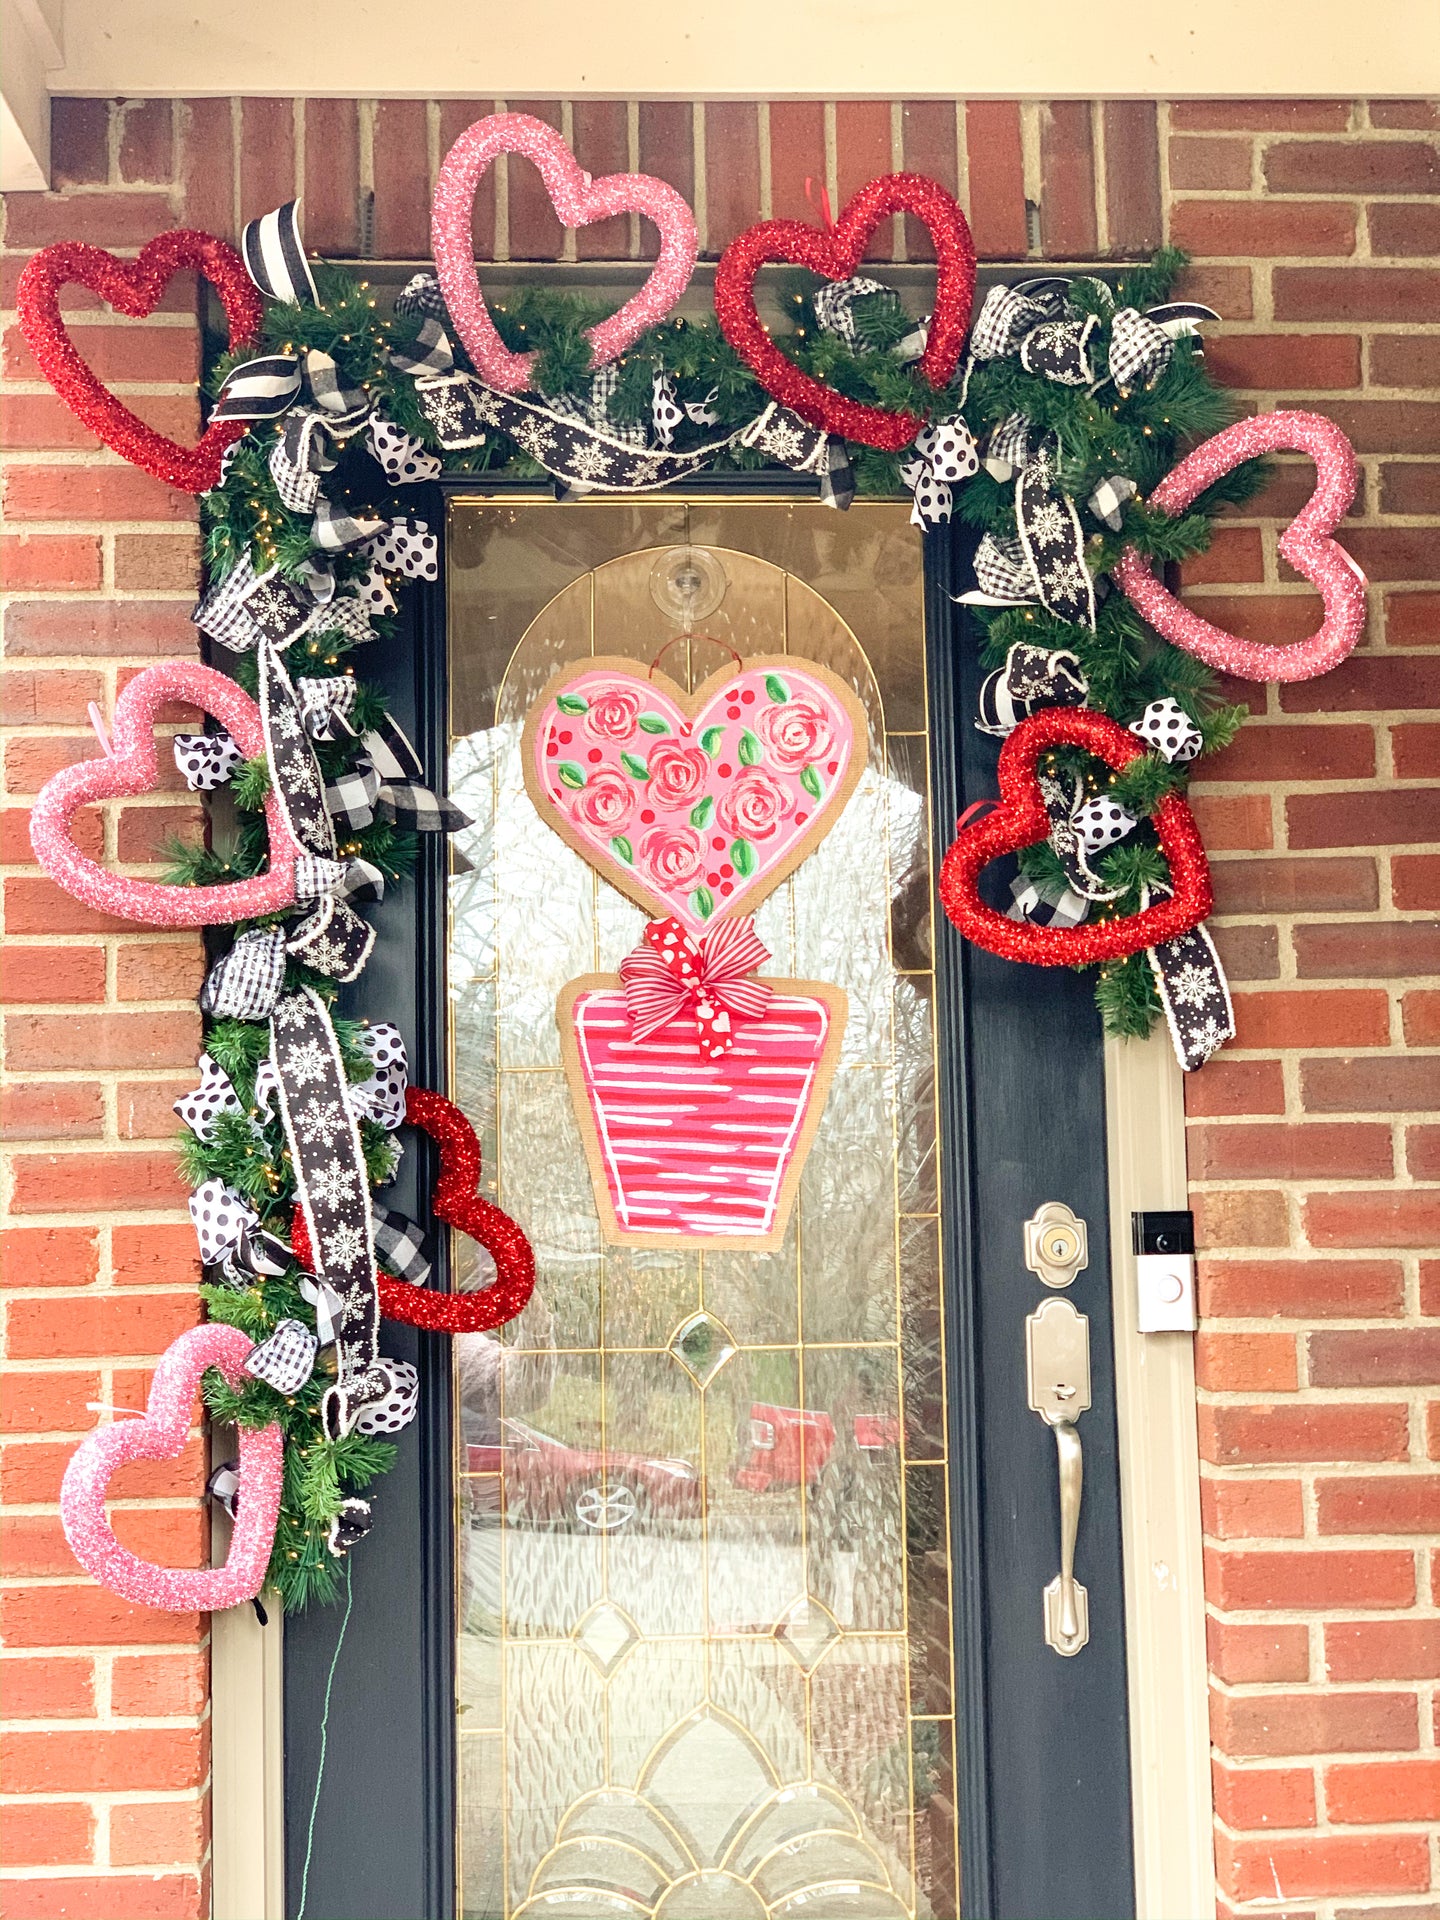 Heart Topiary Door Hanger in First Impressions Inspired Roses